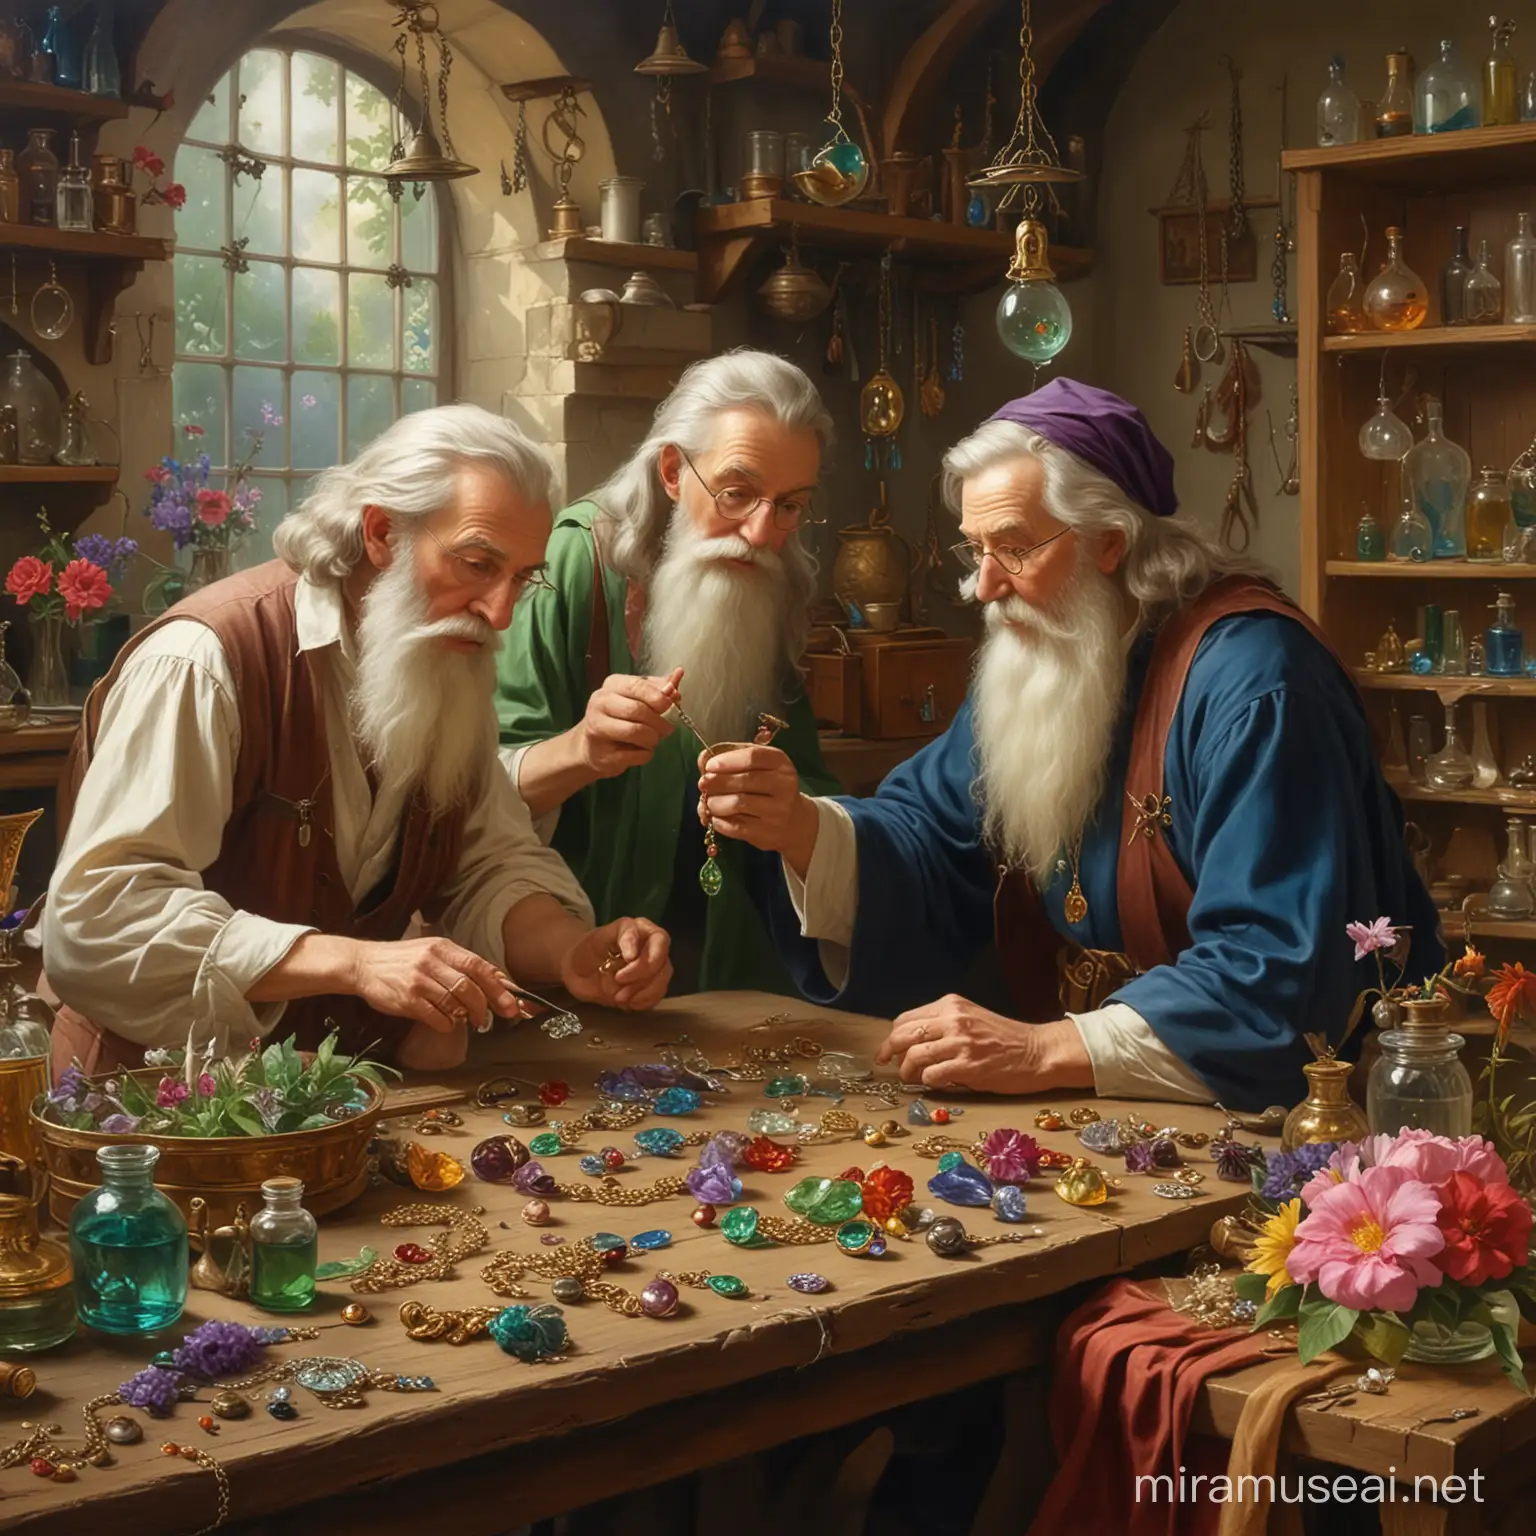 Vintage Oil Painting Wizards and Alchemists Crafting Enchanted Jewelry in 1940 Art